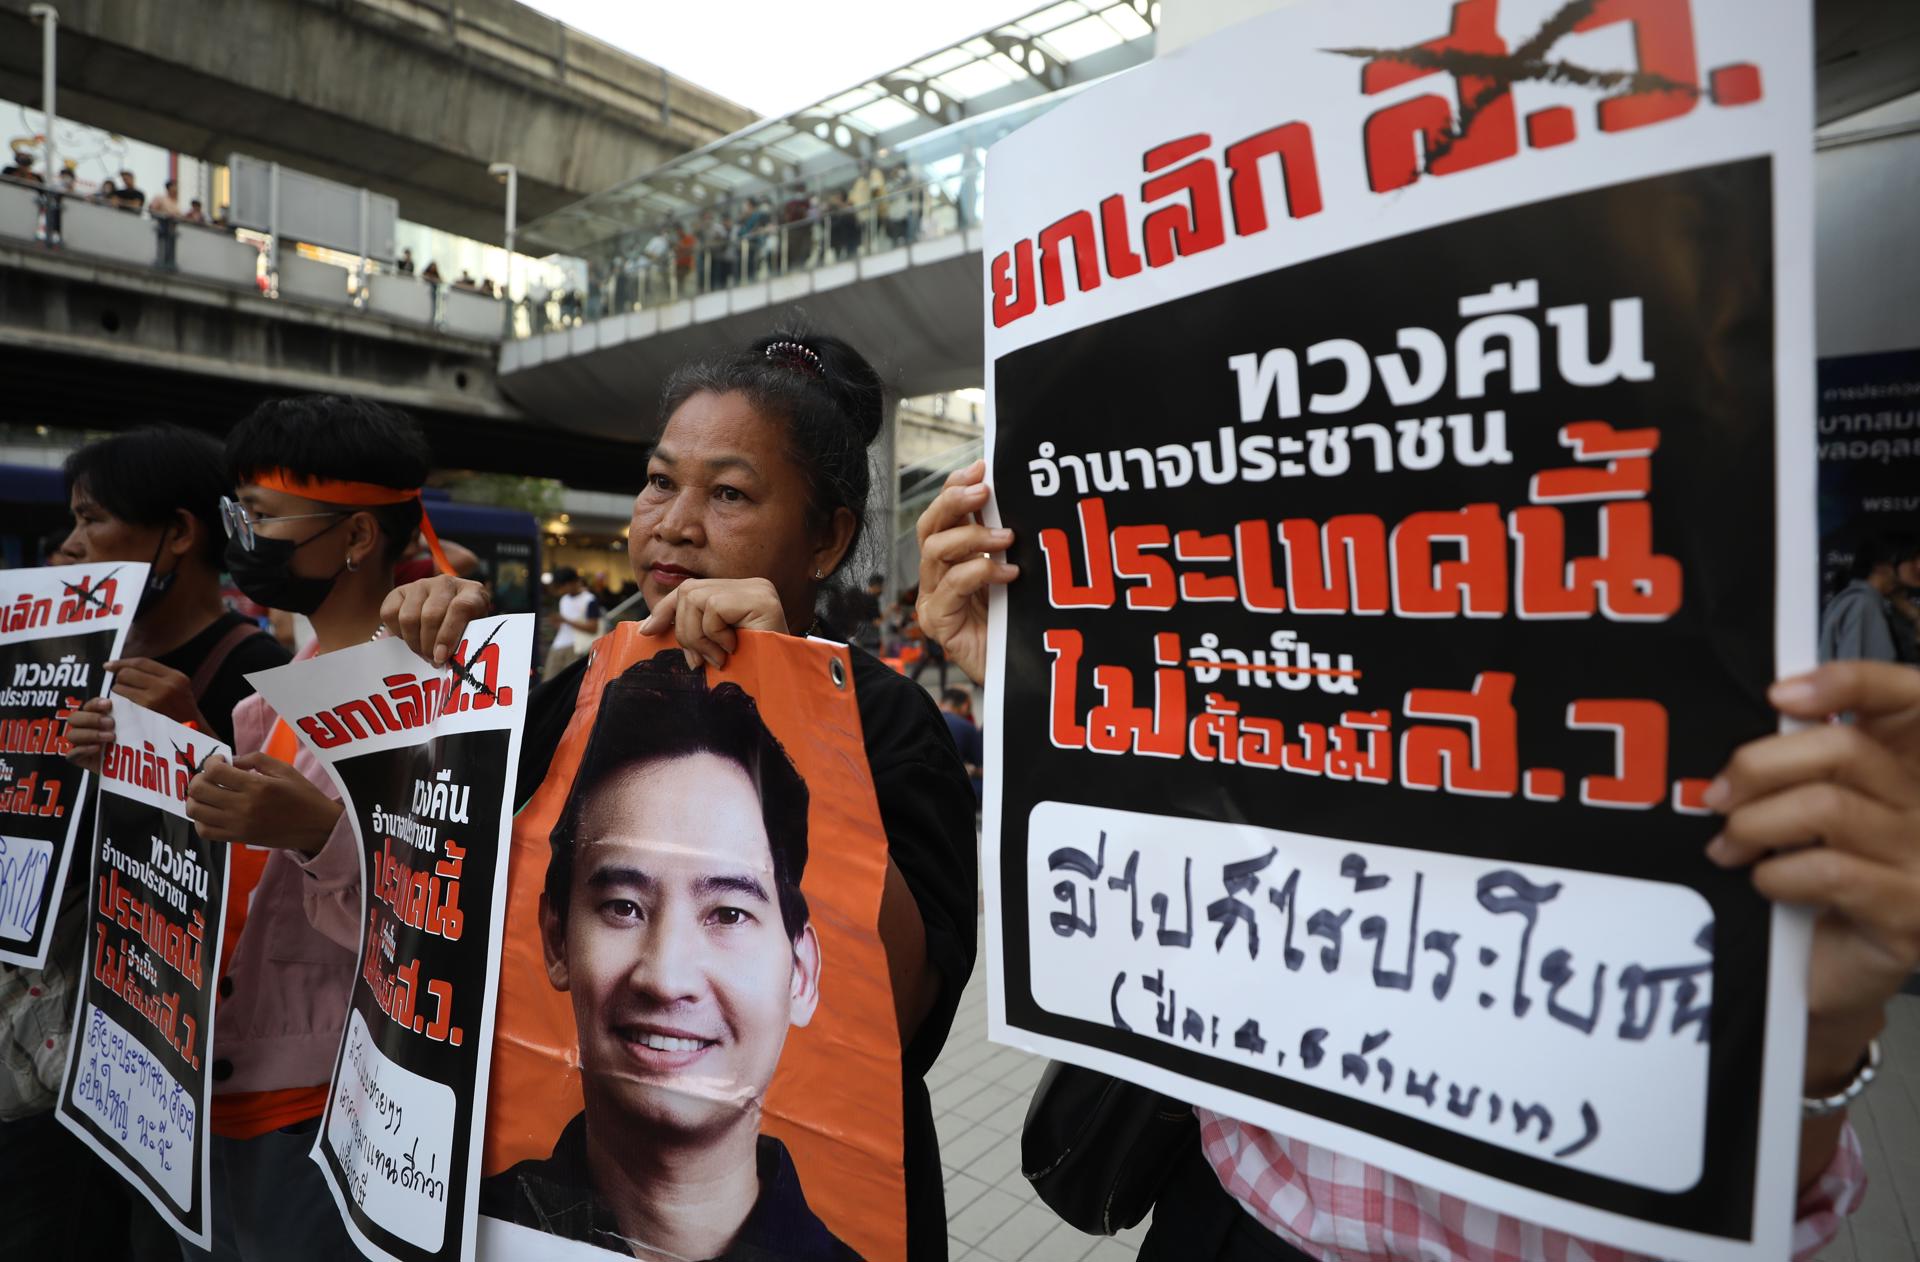 Supporters hold signs against the Thai Senate and a picture of Move Forward Party's leader and its prime ministerial candidate Pita Limjaroenrat (C), as they gather for a protest outside the Bangkok Art and Culture Centre in Bangkok, Thailand, 14 July 2023. Hundreds of people gathered to protest against the Senate after the election front-runner Pita Limjaroenrat failed to secure a crucial vote to become Thailand's next prime minister in a joint session of the House of Representatives and Senate on 13 July. A majority of senators opposed voting for him. (Protestas, Tailandia) EFE/EPA/NARONG SANGNAK